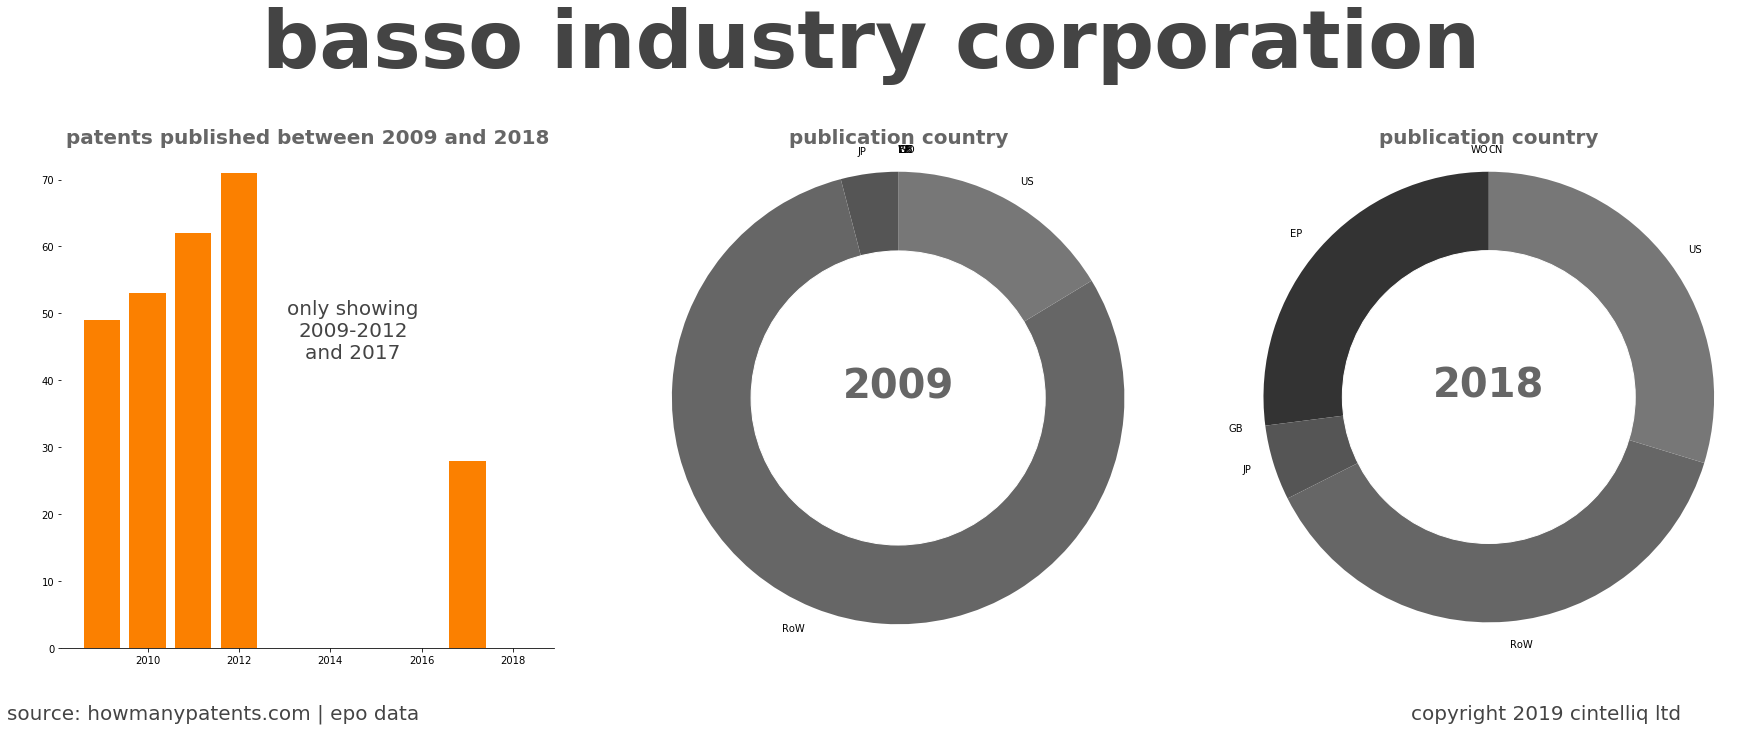 summary of patents for Basso Industry Corporation